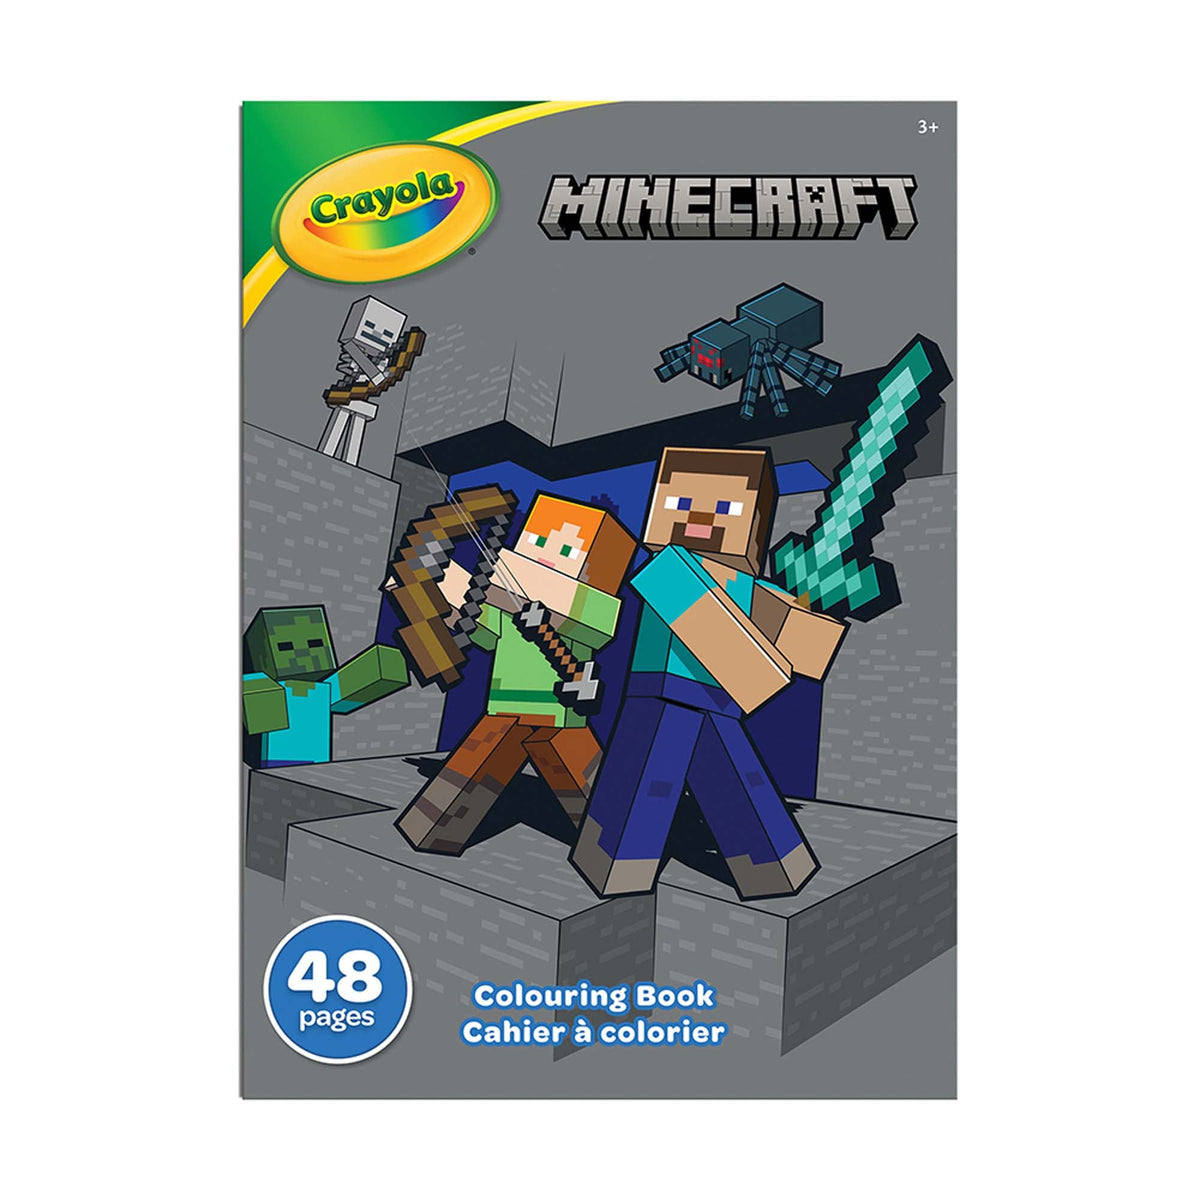 JOUET K.I.D. INC. Toys & Games Minecraft Coloring Book, 48 Pages, 1 Count